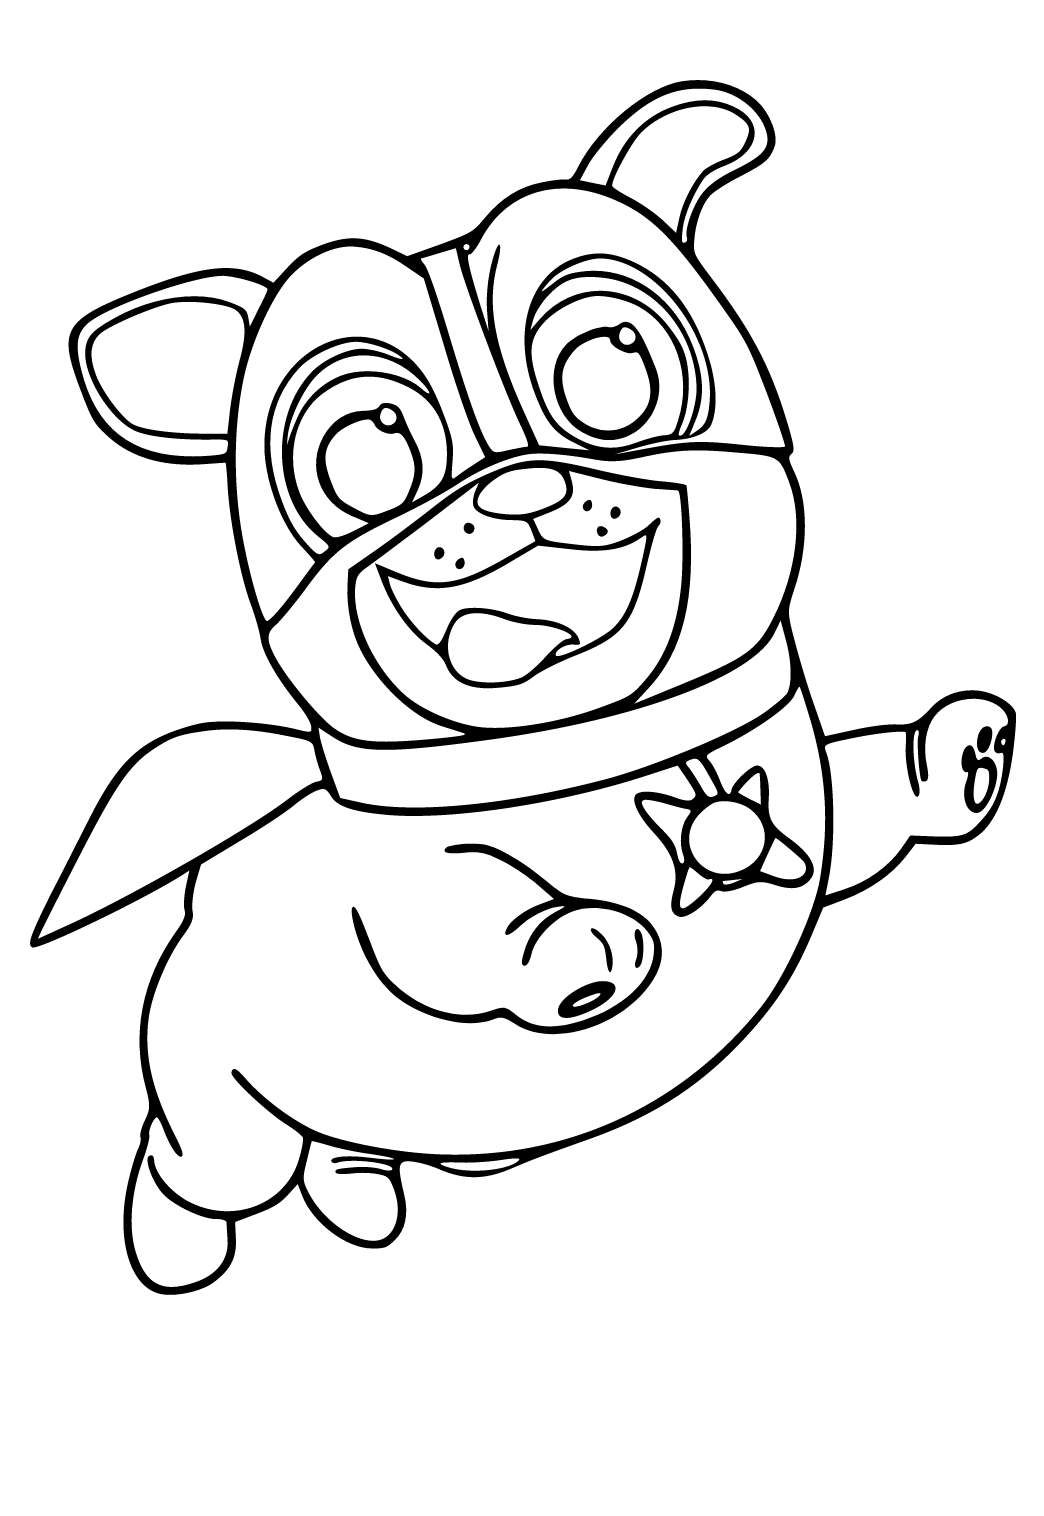 Free printable puppy dog pals cloak coloring page sheet and picture for adults and kids girls and boys